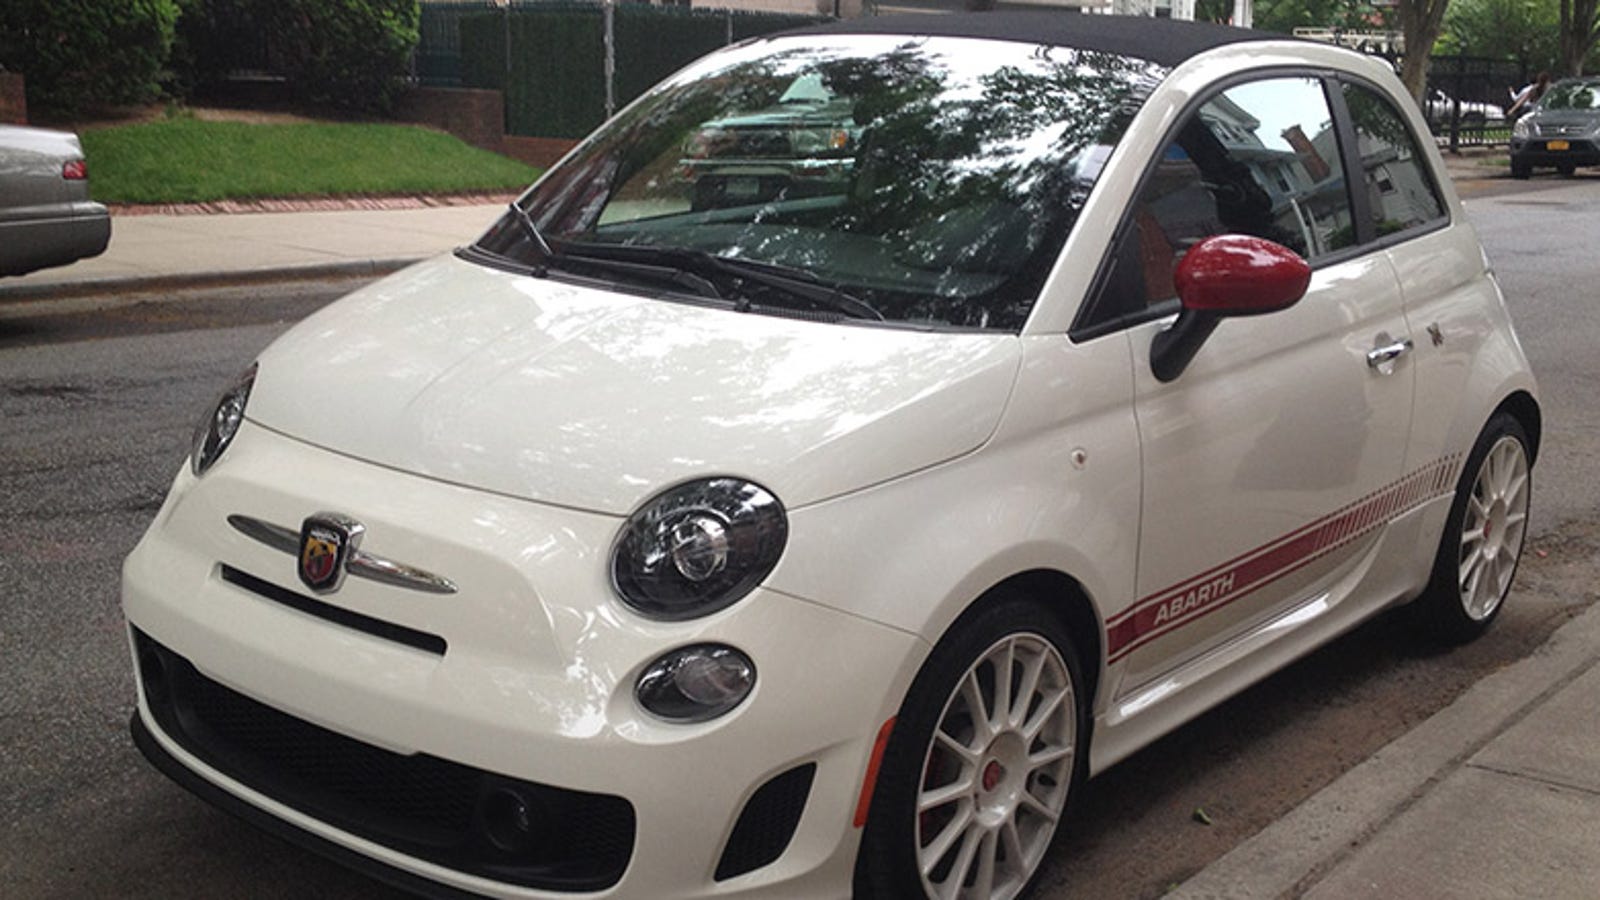 What Do You Want To Know About The Fiat Abarth 500C?